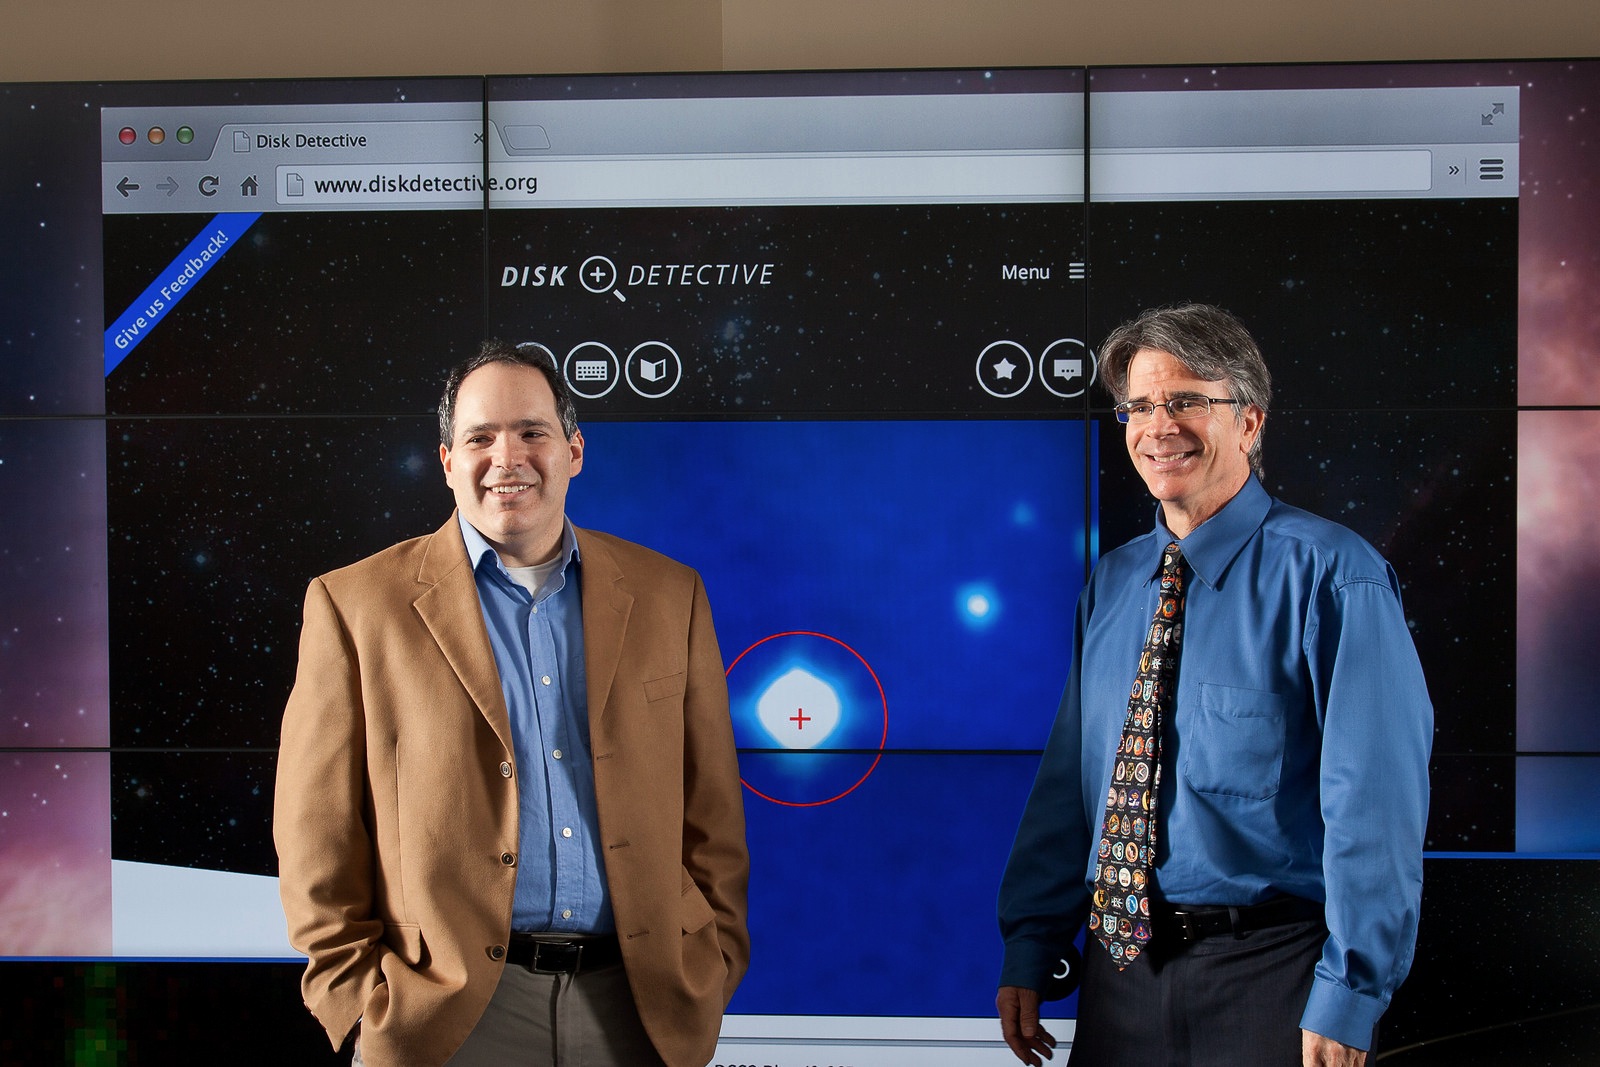 Marc Kuchner and Jim Garvin stand in front of a computer screen showing the DiskDetective.org website.